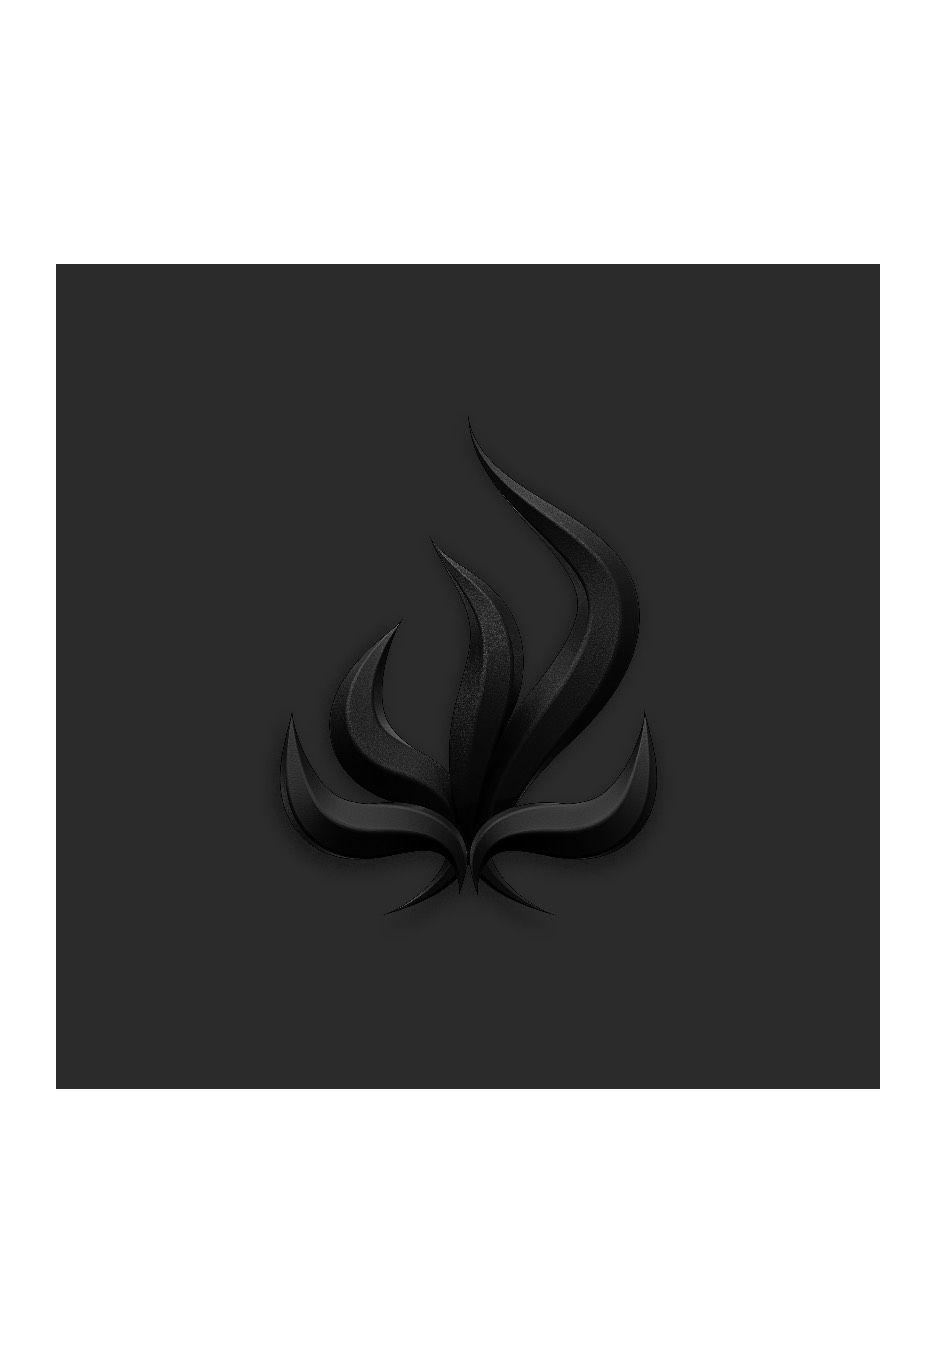 Black Flame Logo - Bury Tomorrow - Black Flame - CD - CDs, Vinyl and DVDs of your ...